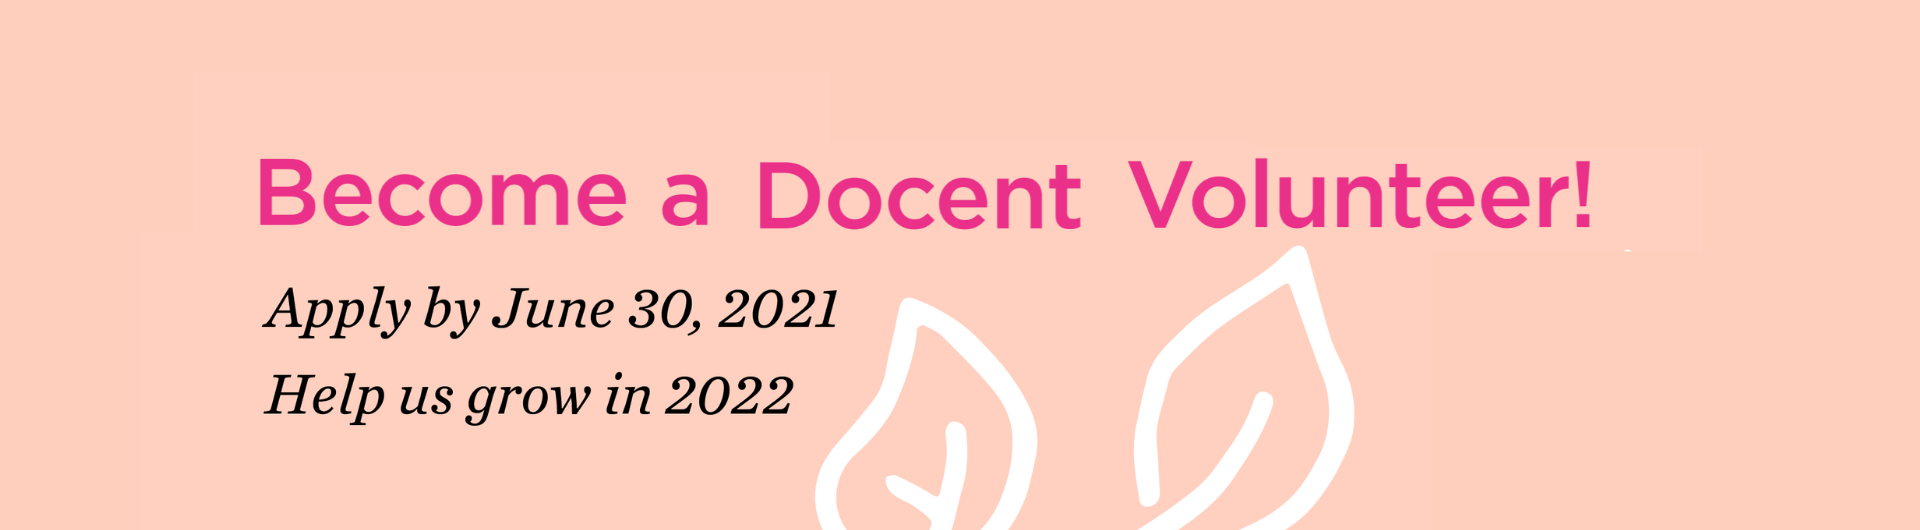 become a docent volunteer applications accepted through june 2021